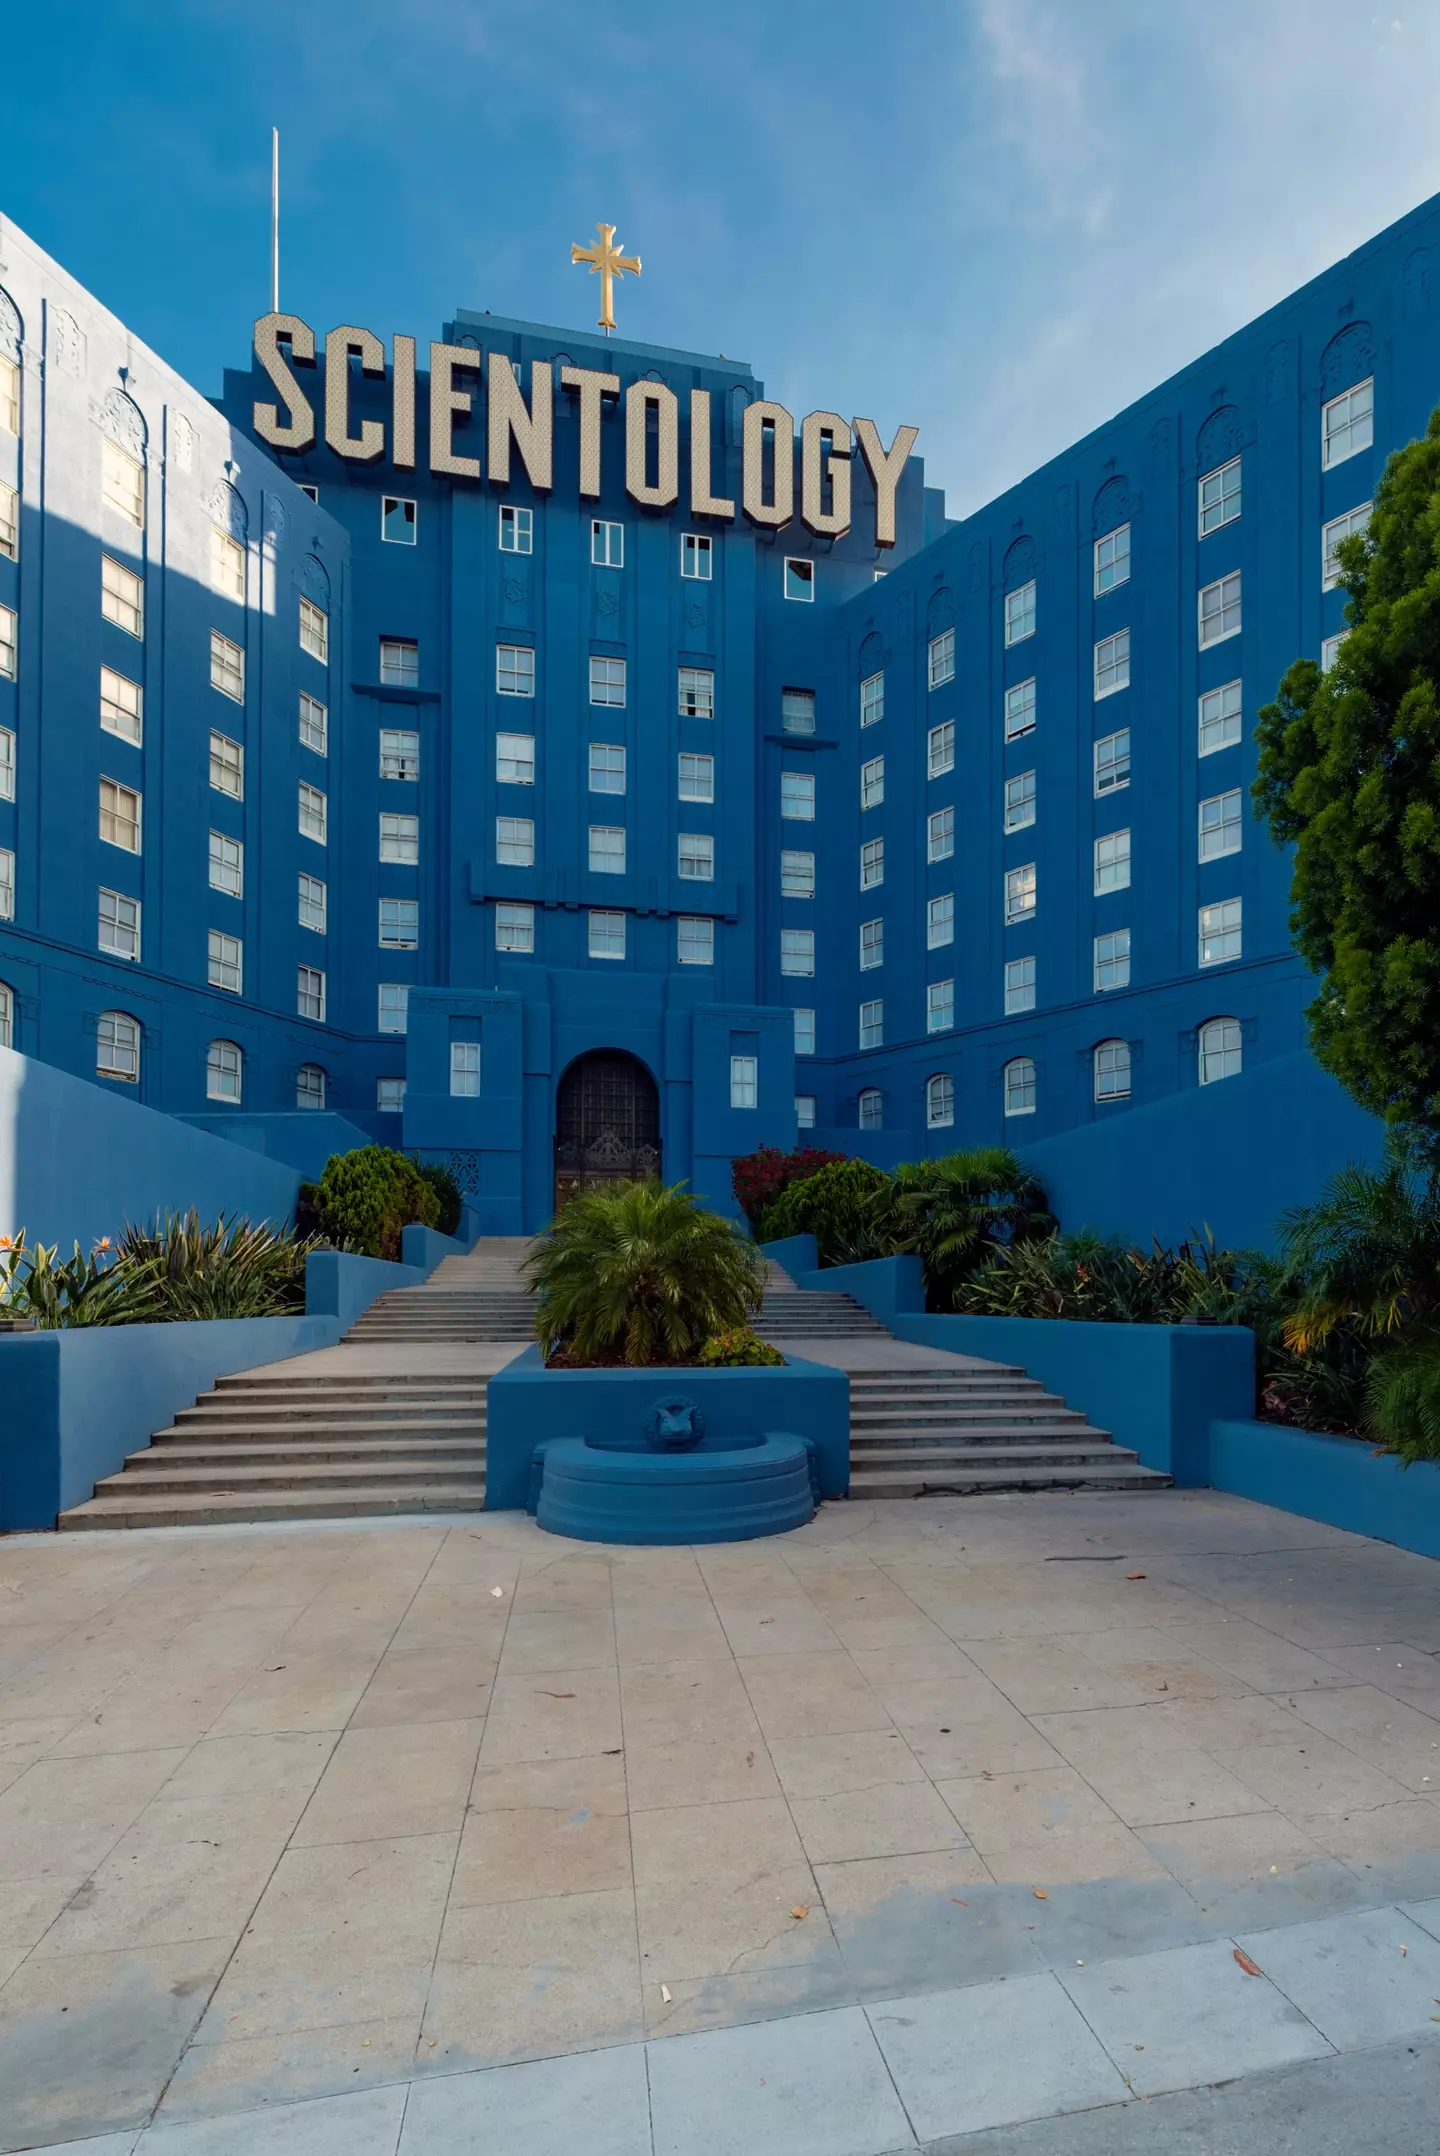 The Scientology headquarters in Los Angeles.